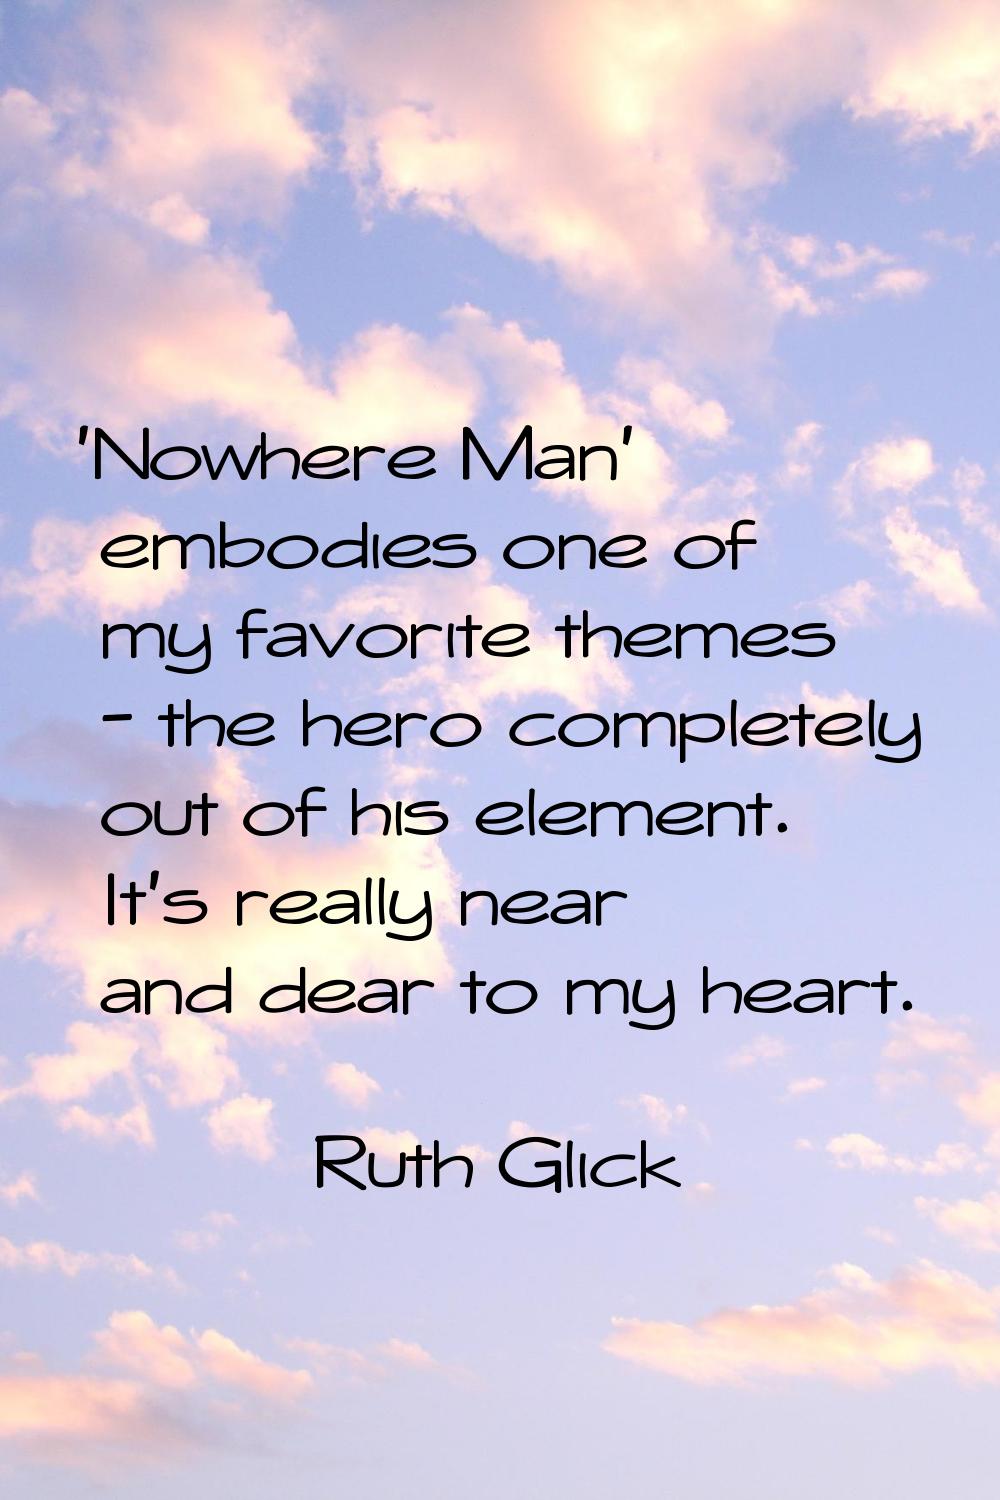 'Nowhere Man' embodies one of my favorite themes - the hero completely out of his element. It's rea